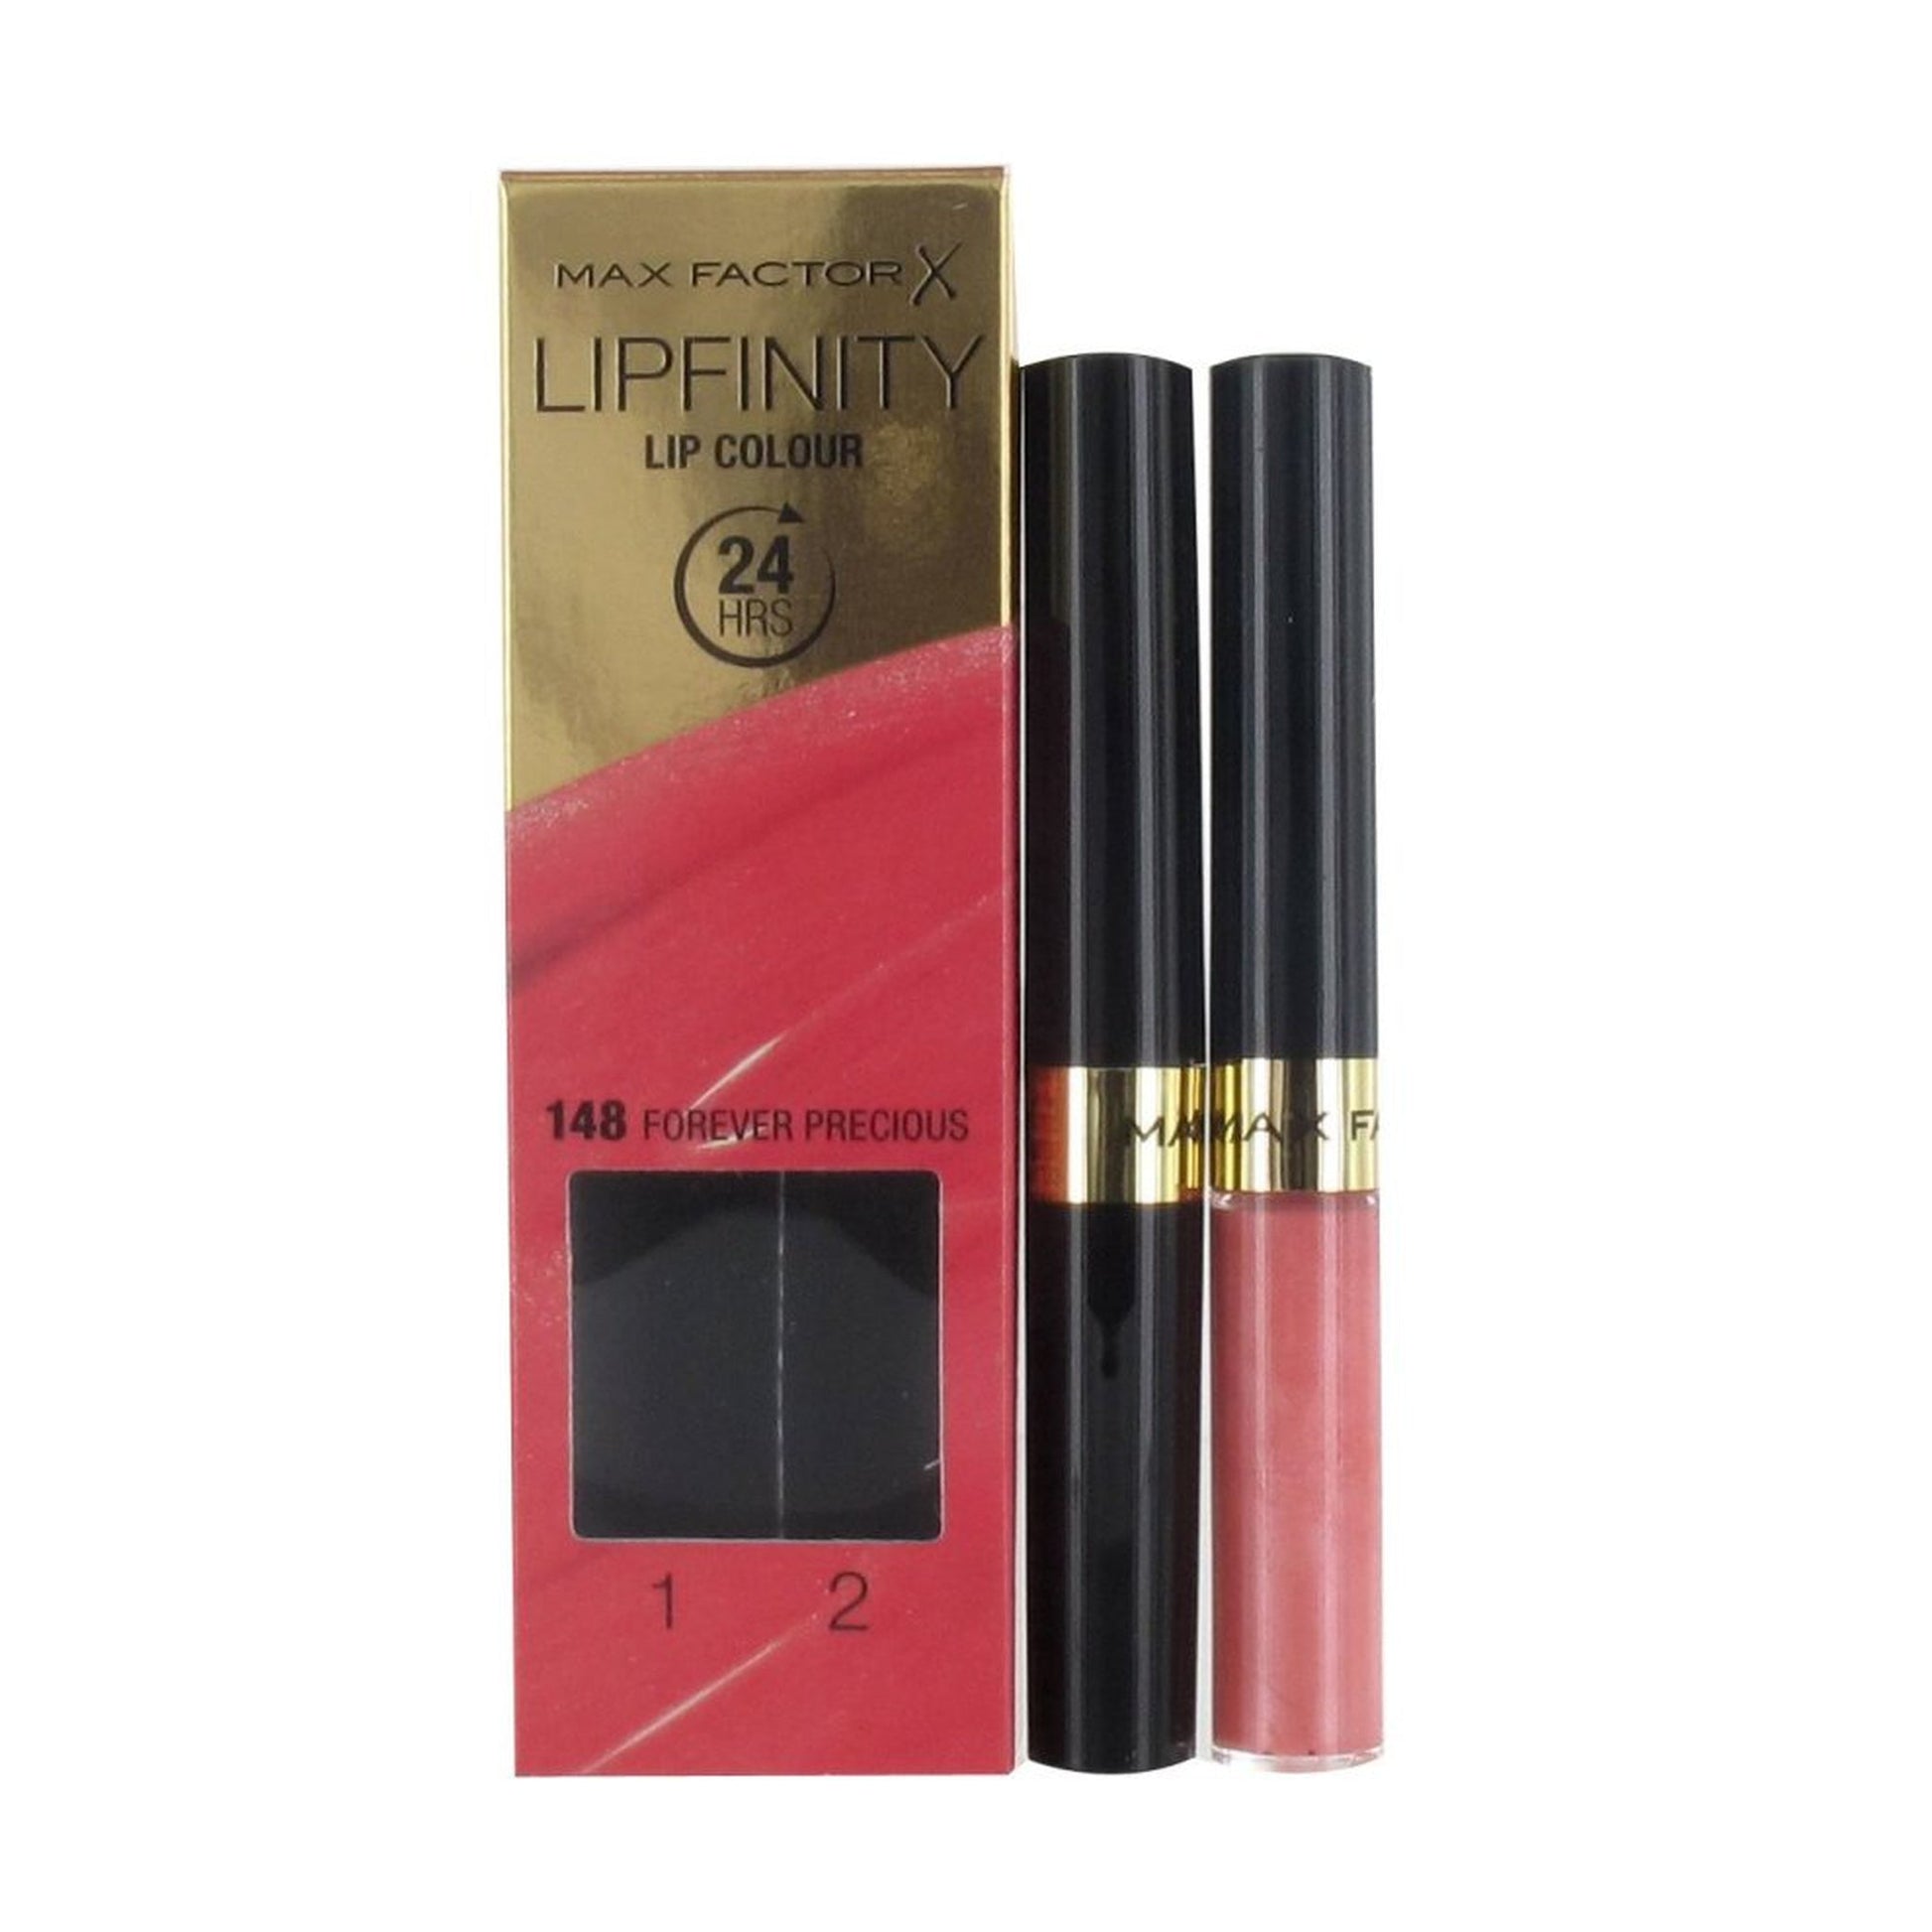 Max Factor Lipfinity Long-Lasting Two Step Lipstick -148 Forever Precious-Max Factor-BeautyNmakeup.co.uk